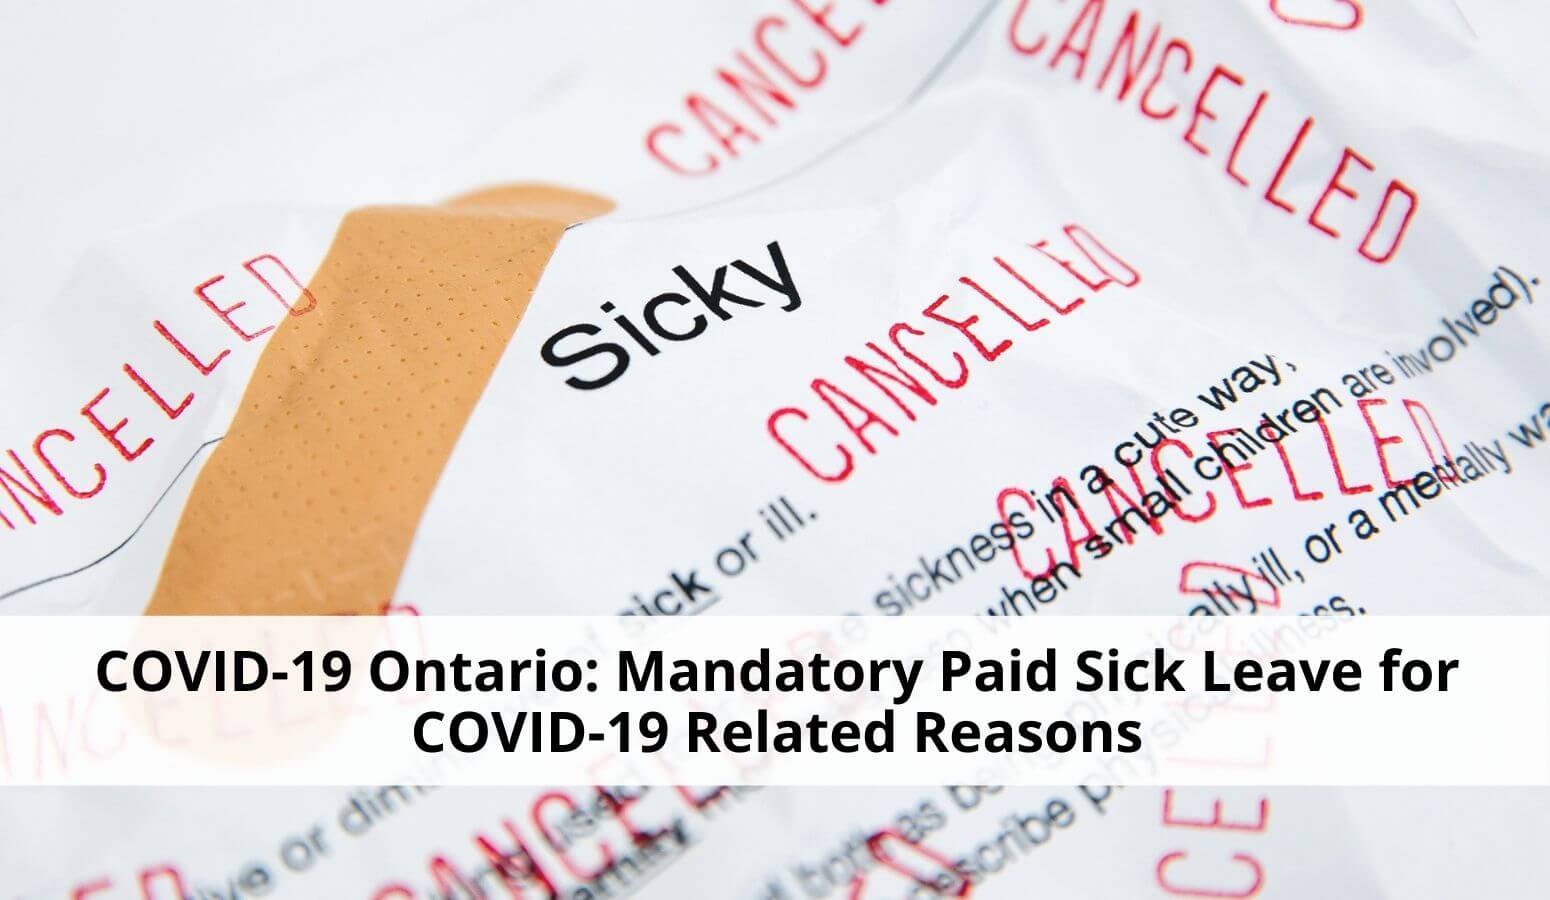 Mandatory Paid Sick Leave for COVID-19